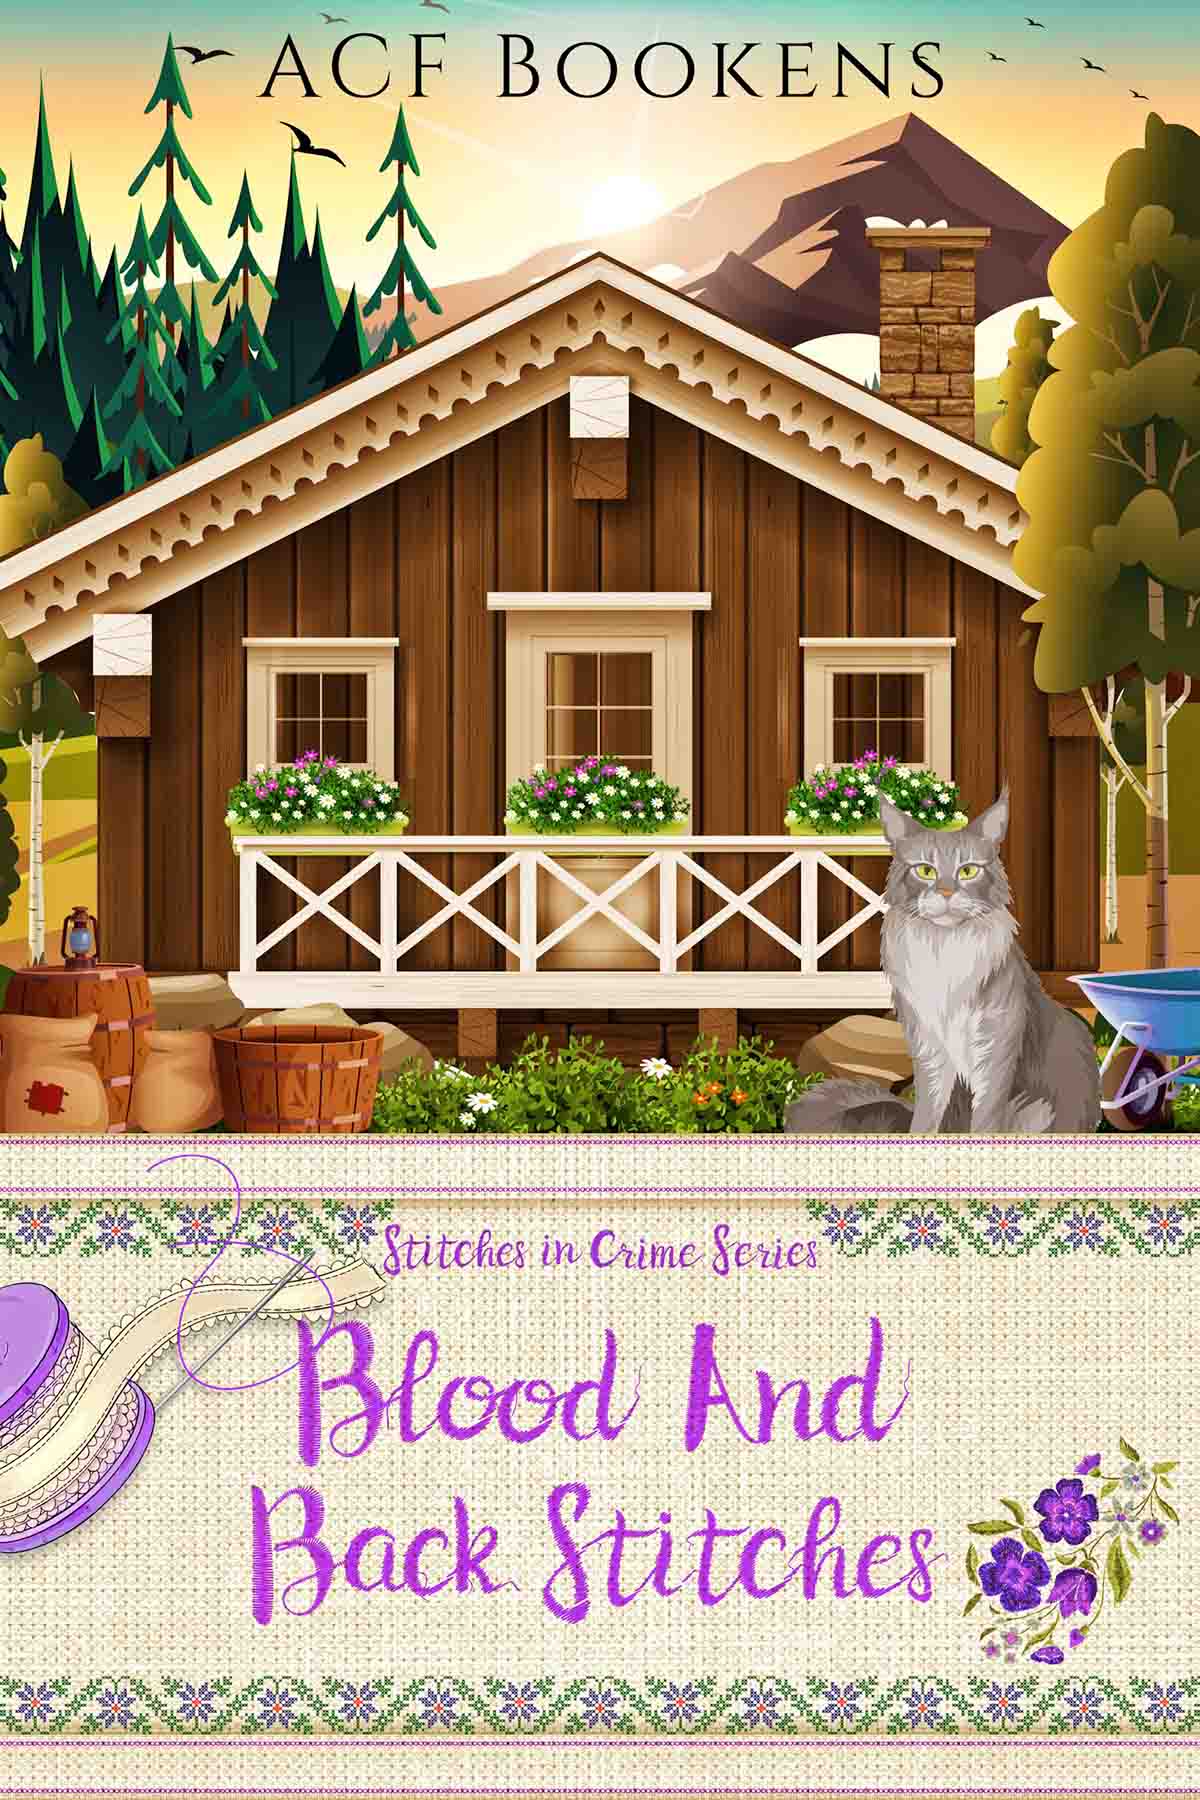 Blood And Back Stitches (Stitches In Crime Book 7)